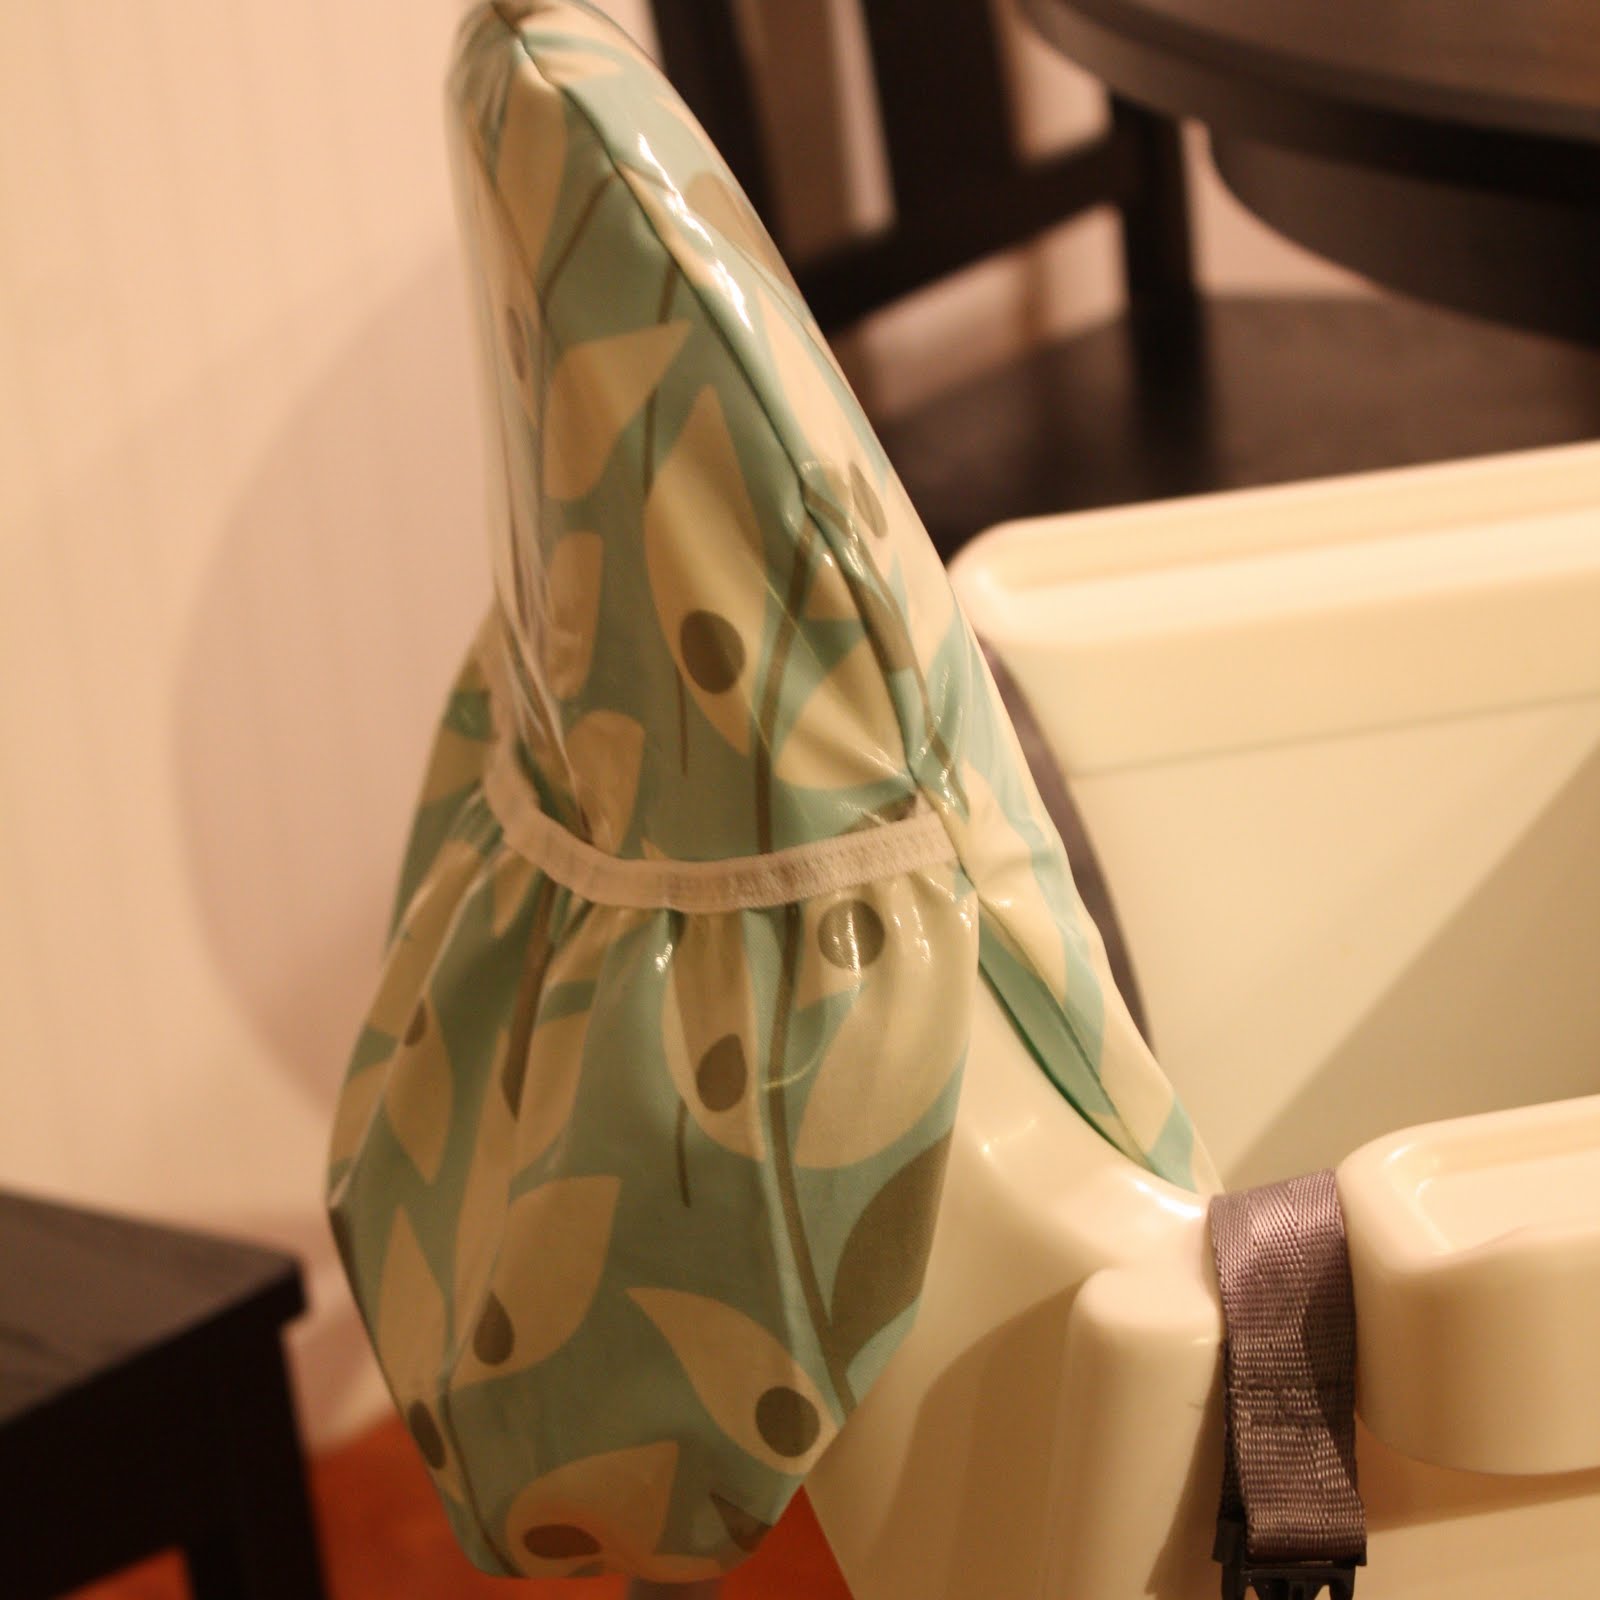 How To Make A High Chair Cover